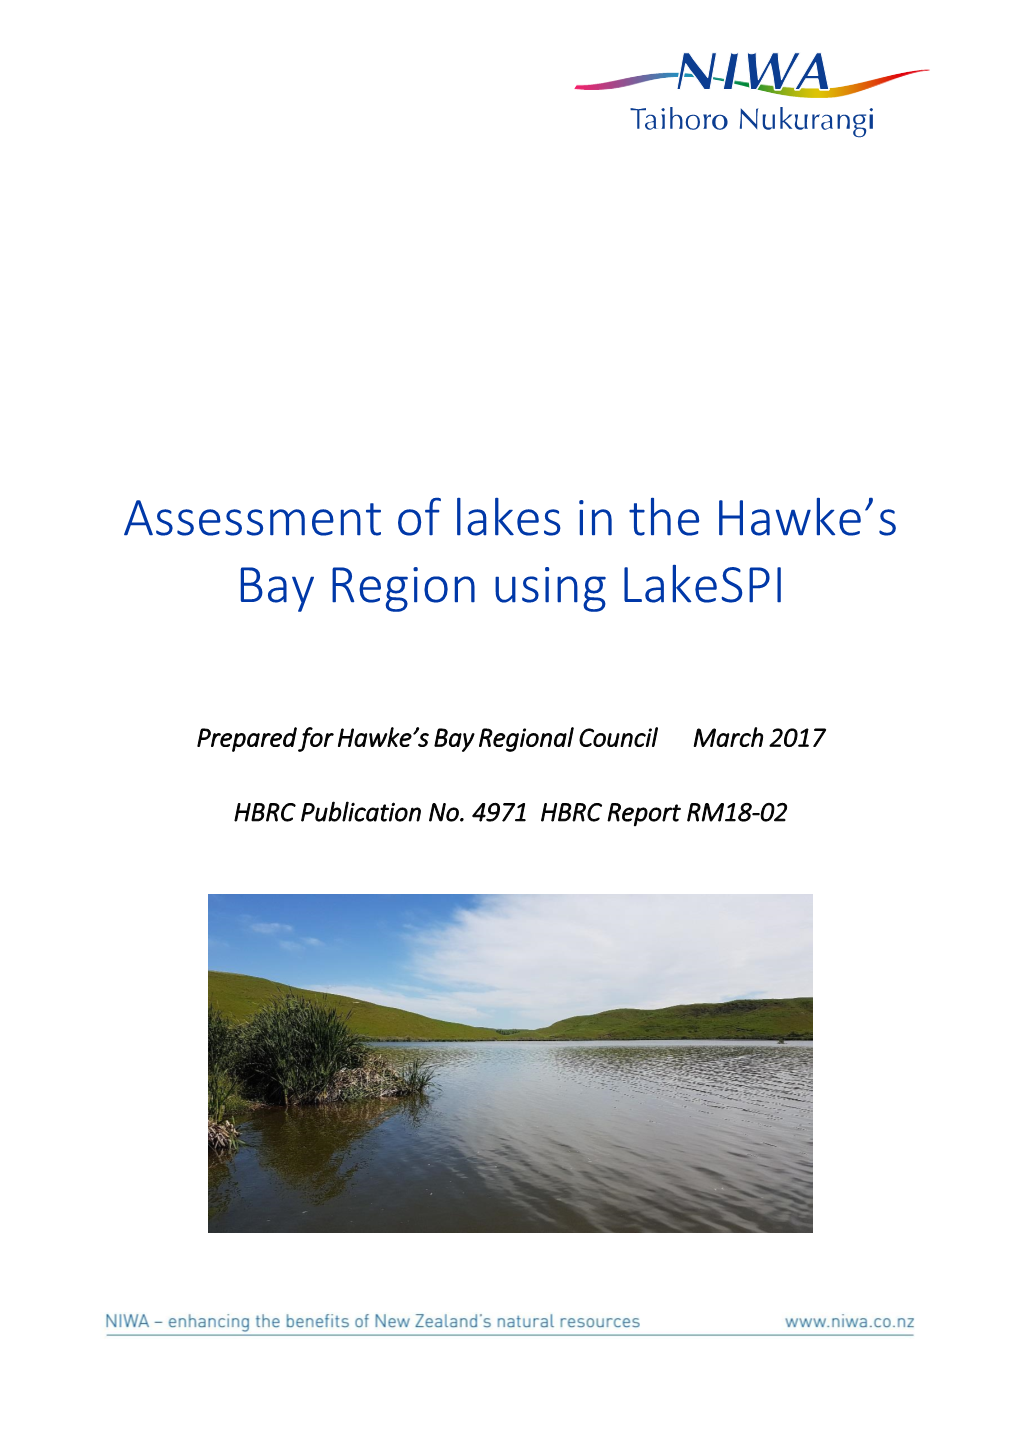 Assessment of Lakes in the Hawke's Bay Region Using Lakespi